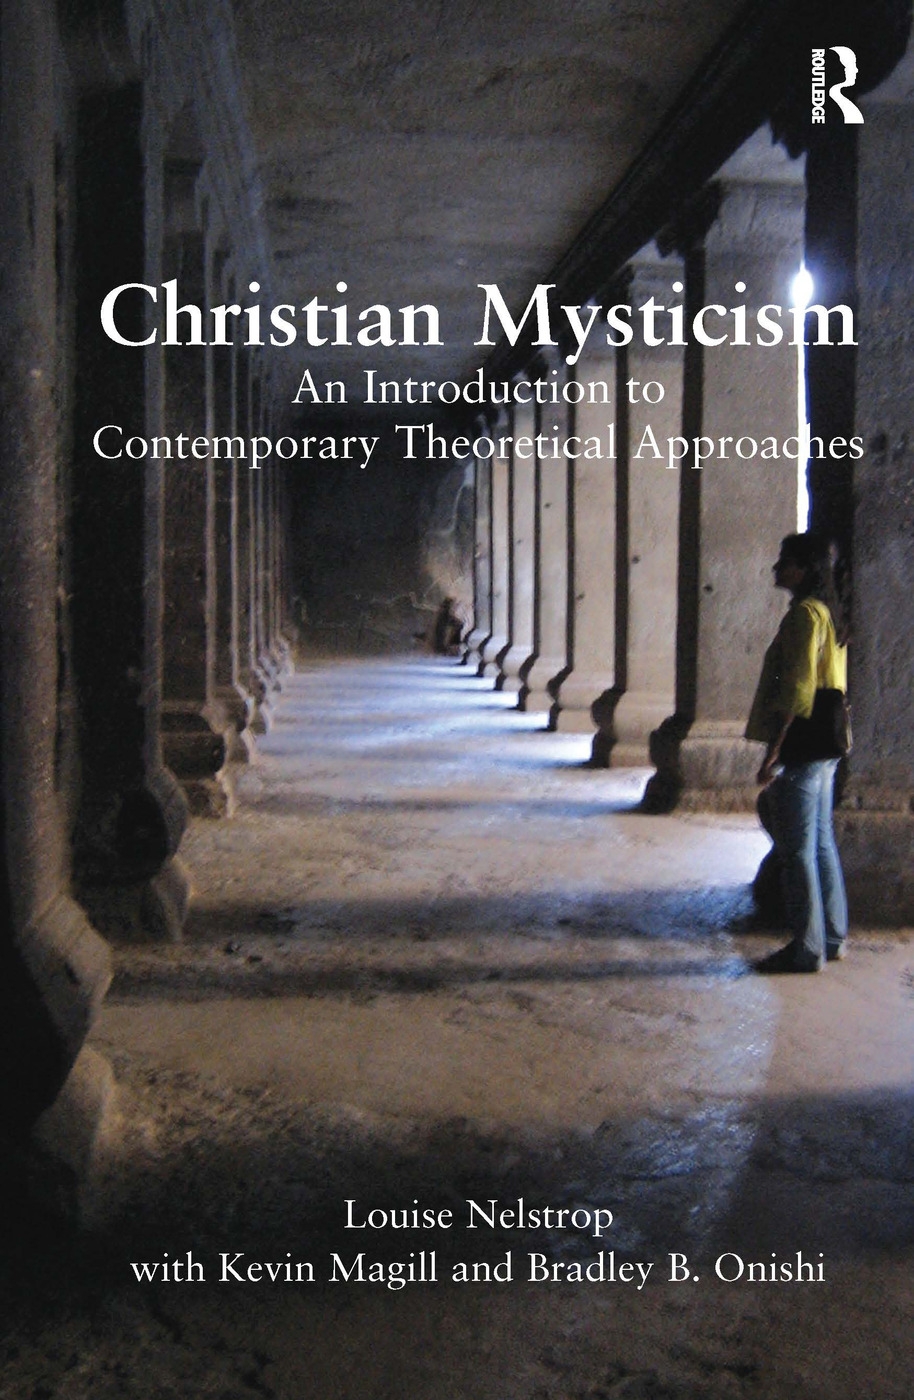 Christian Mysticism: An Introduction to Contemporary Theoretical Approaches. Louise Nelstrop with Kevin Magill and Bradley B. Onishi